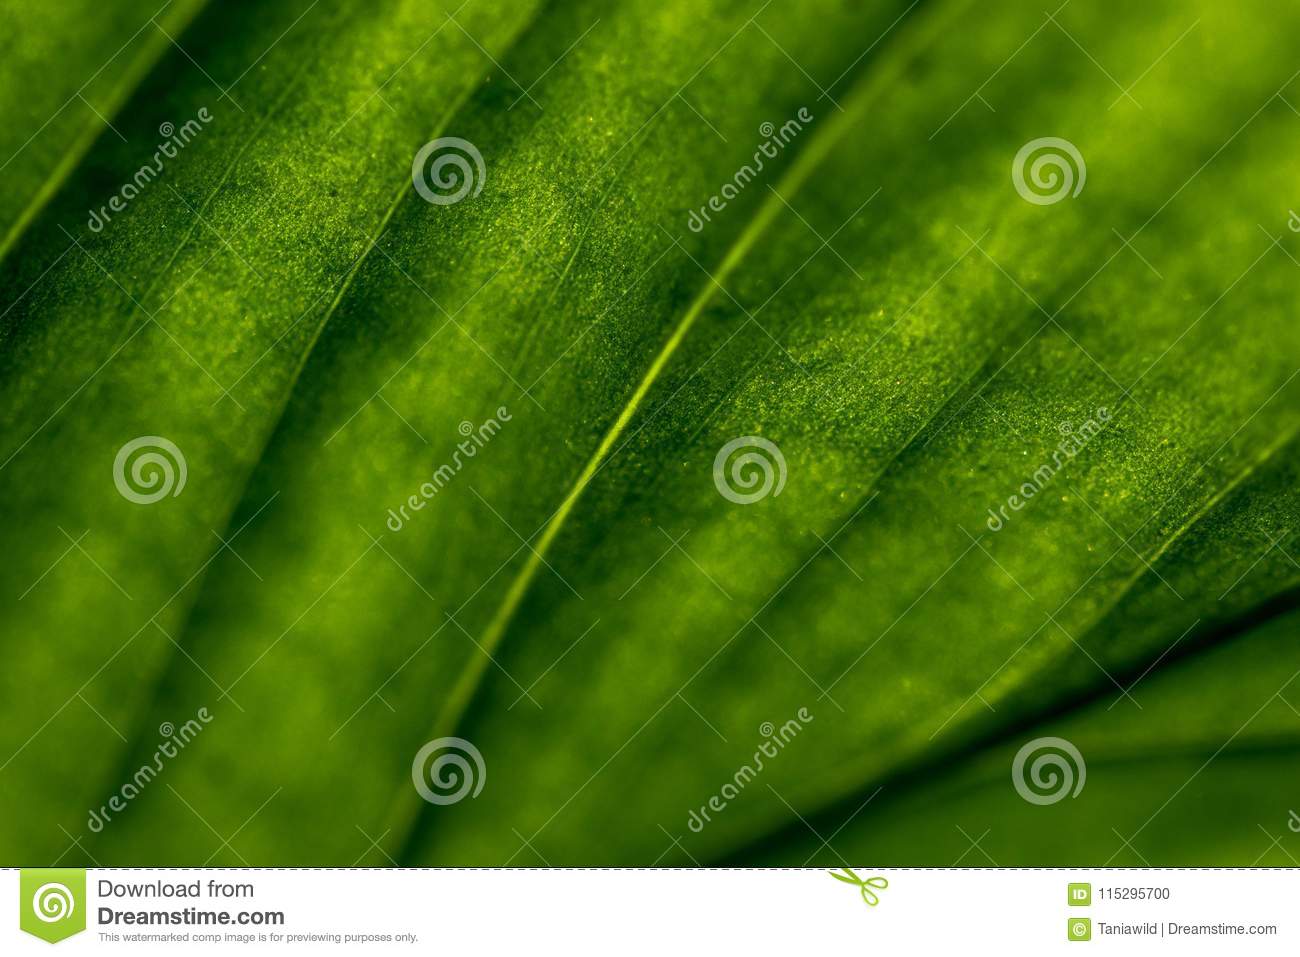 Closeup background of sunlight ing through green leaf rich texture good for phone or desktop wallpapers stock photo